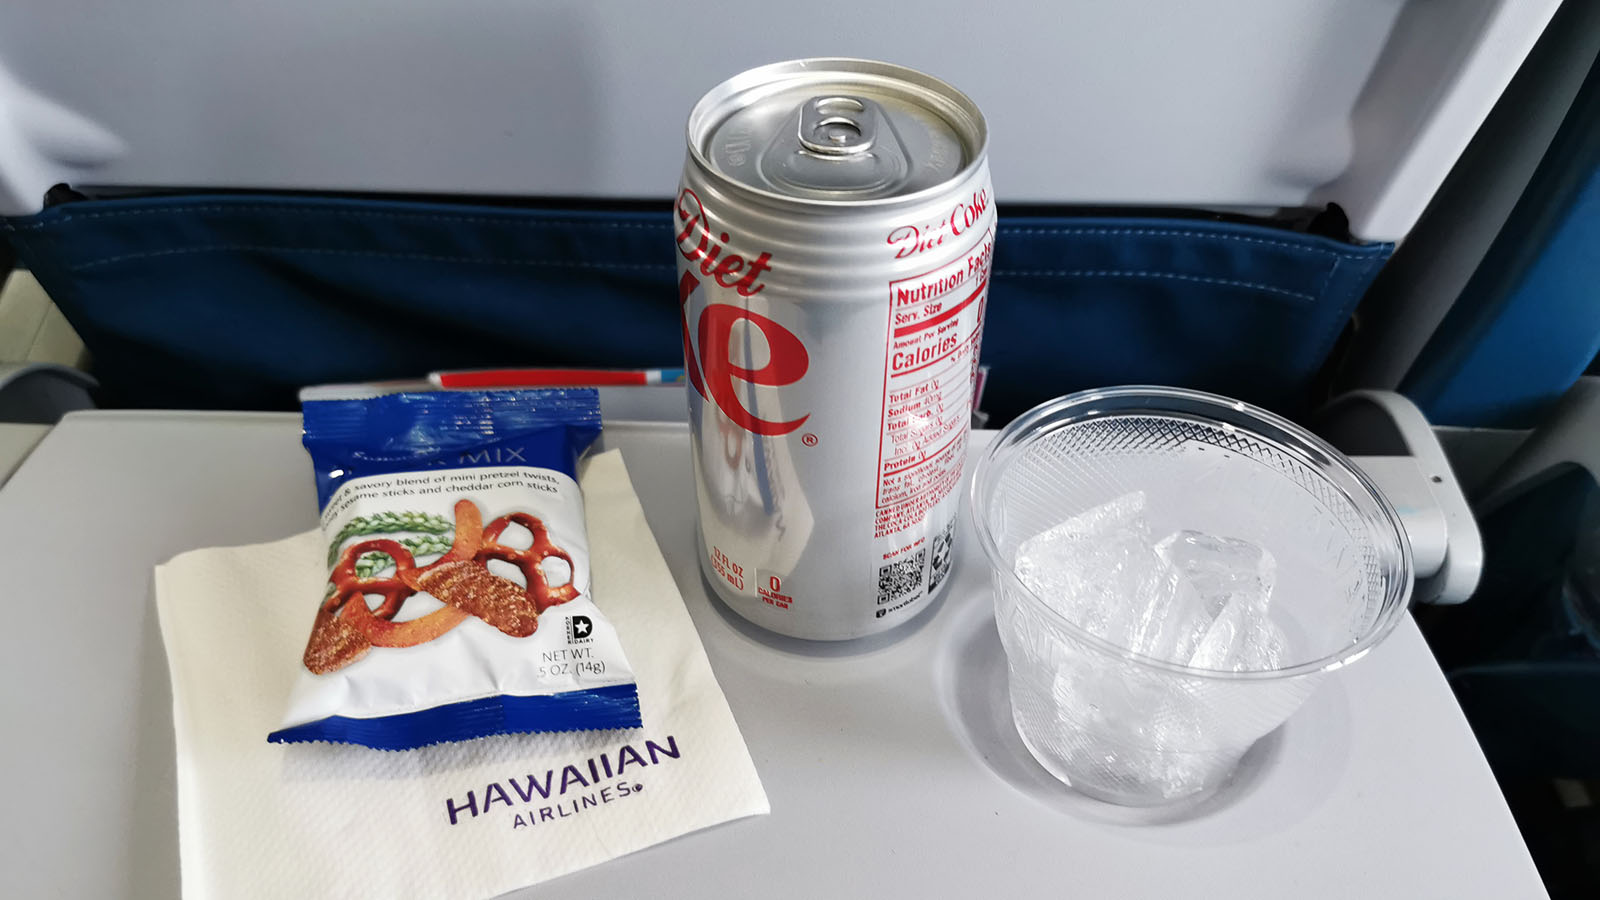 Soft drink and pretzels in Economy on Hawaiian Airlines